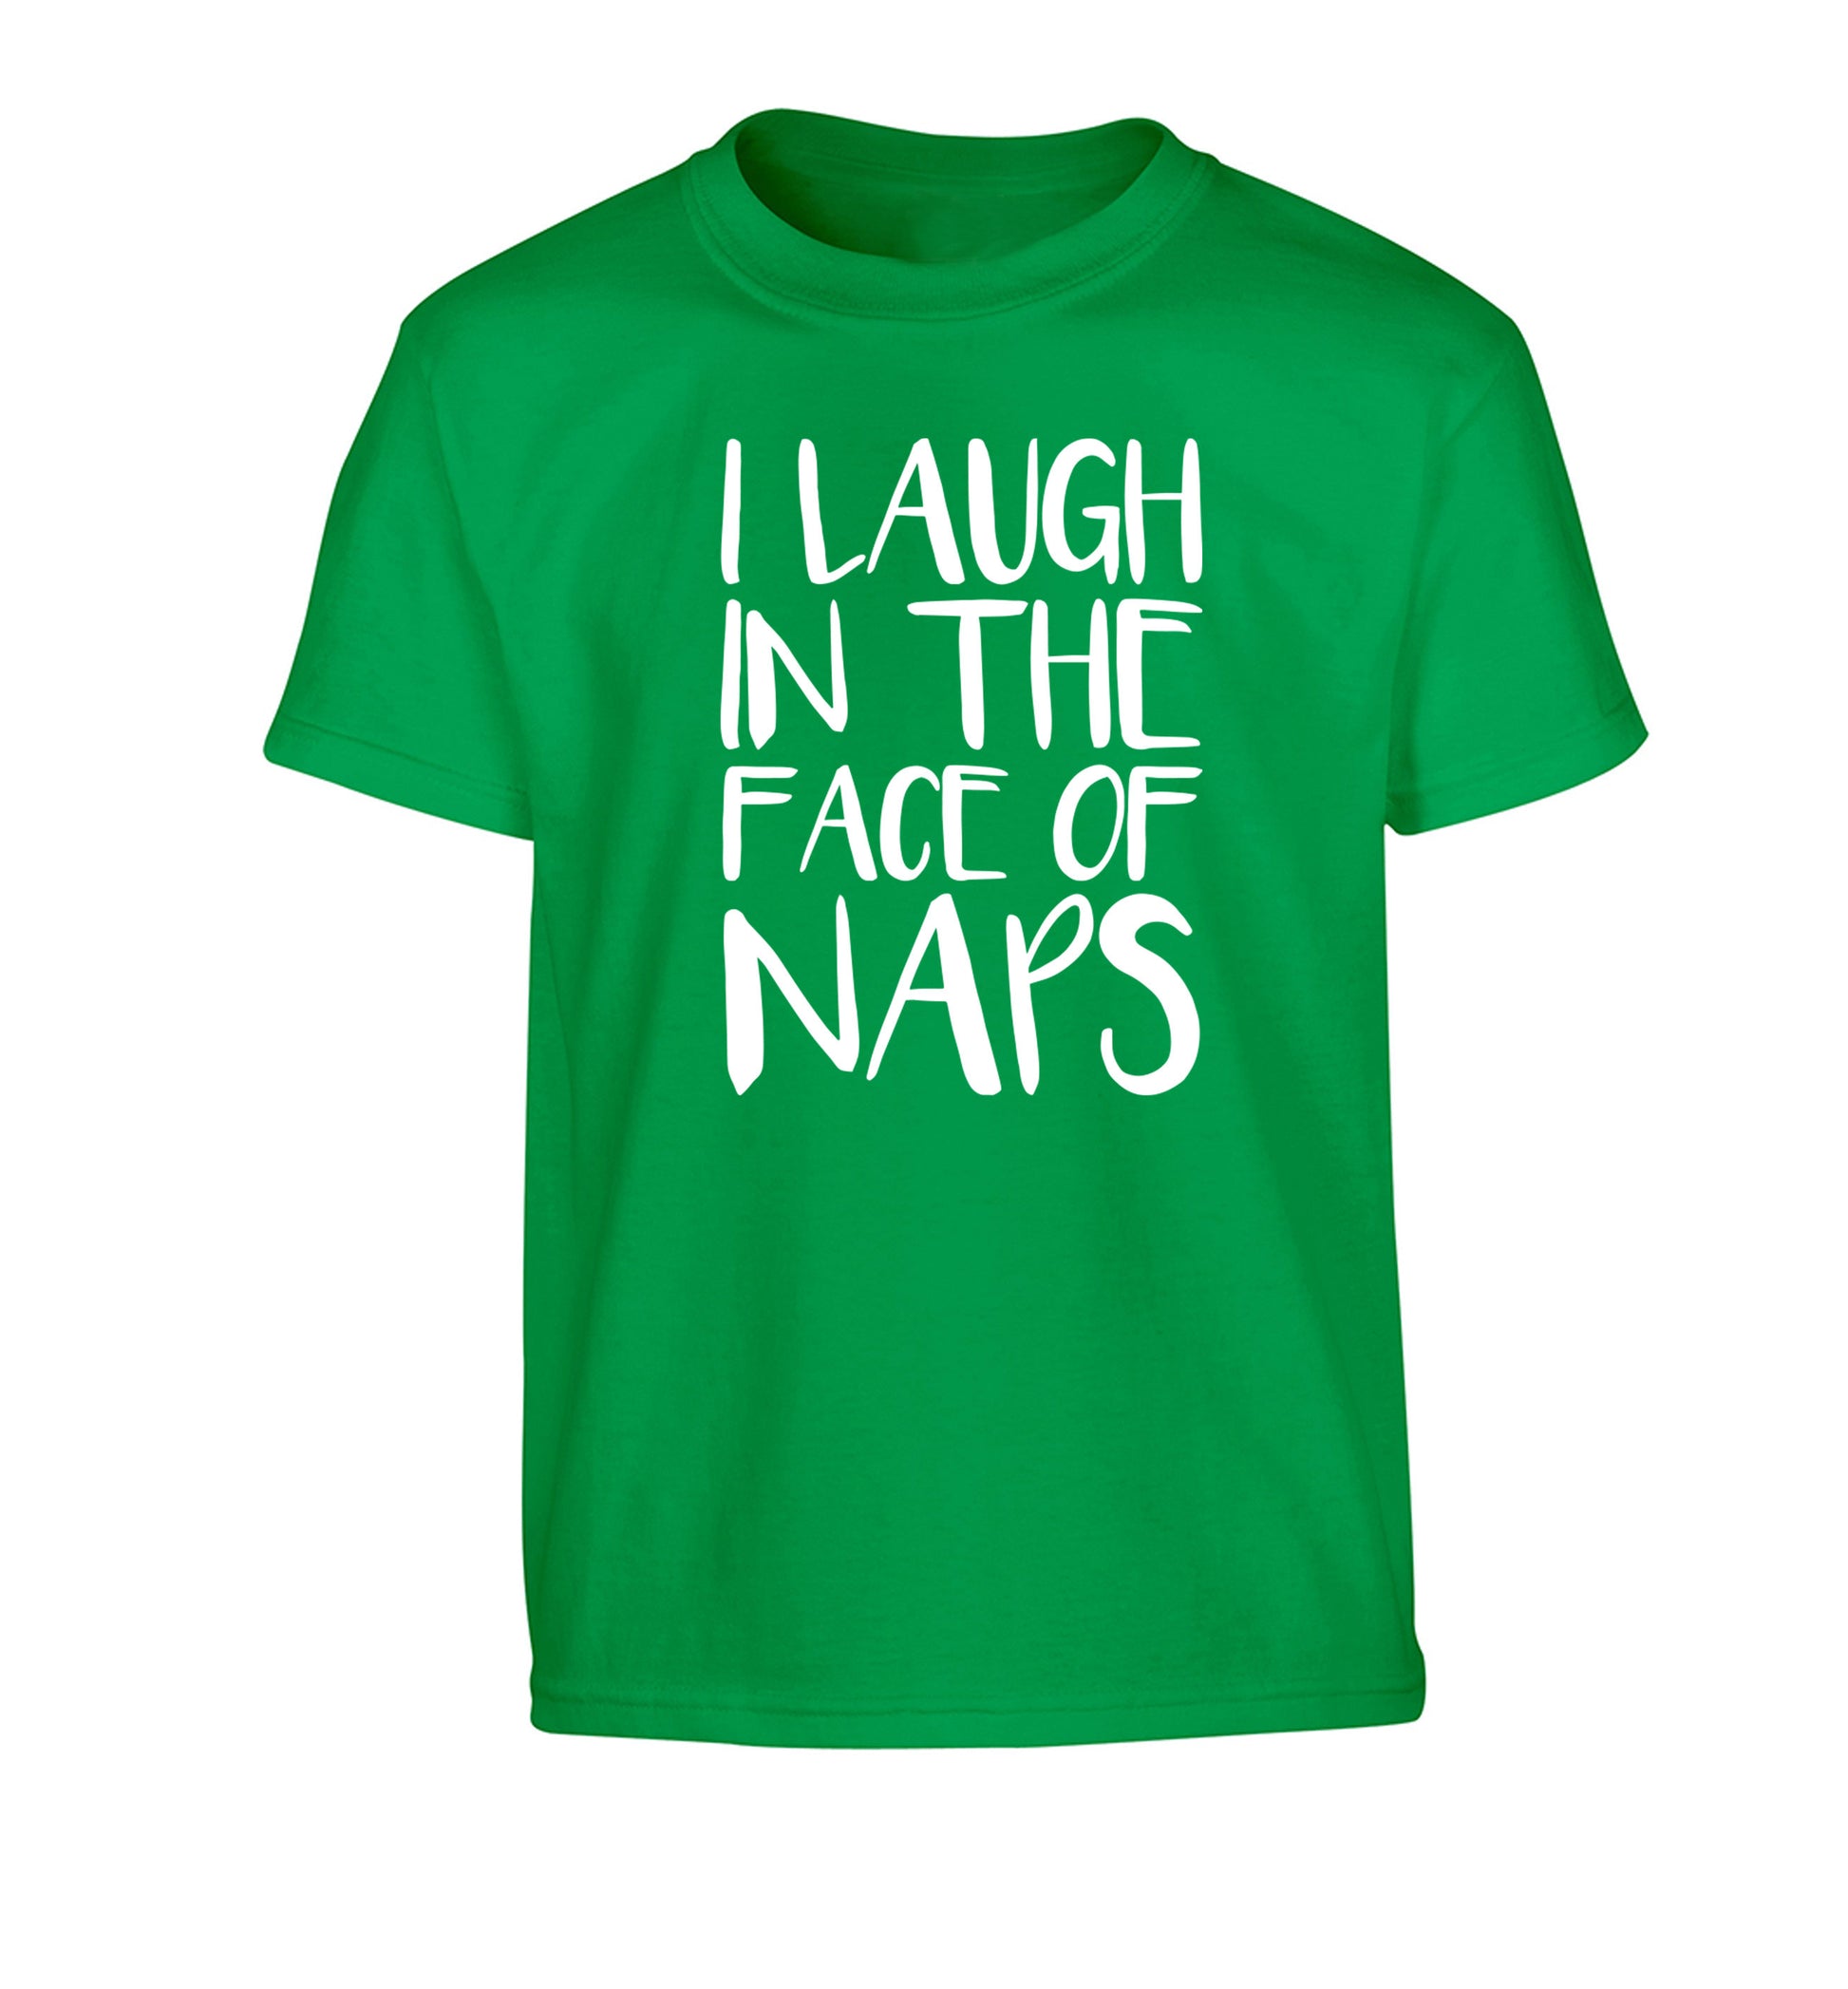 I laugh in the face of naps Children's green Tshirt 12-14 Years